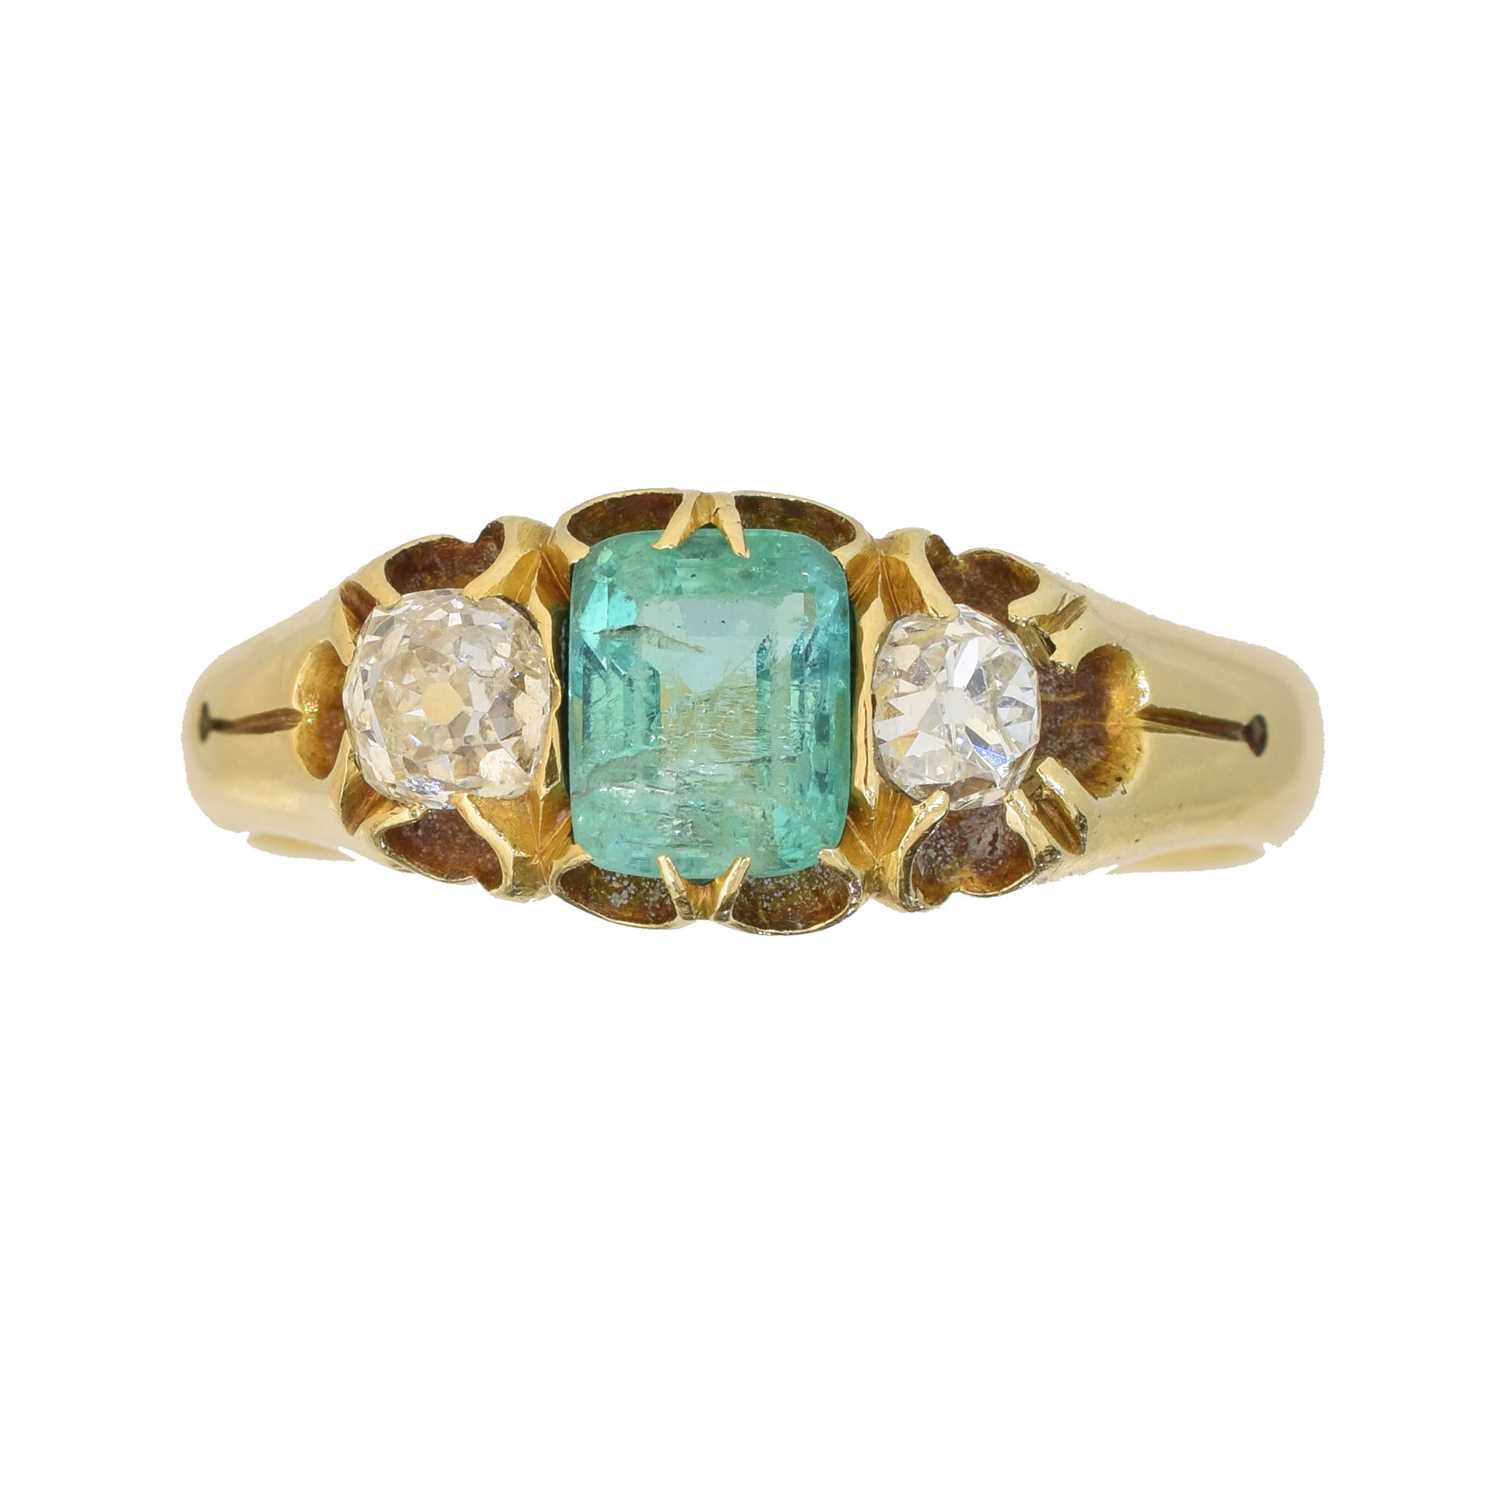 Lot A late Victorian 18ct gold emerald and diamond three stone ring